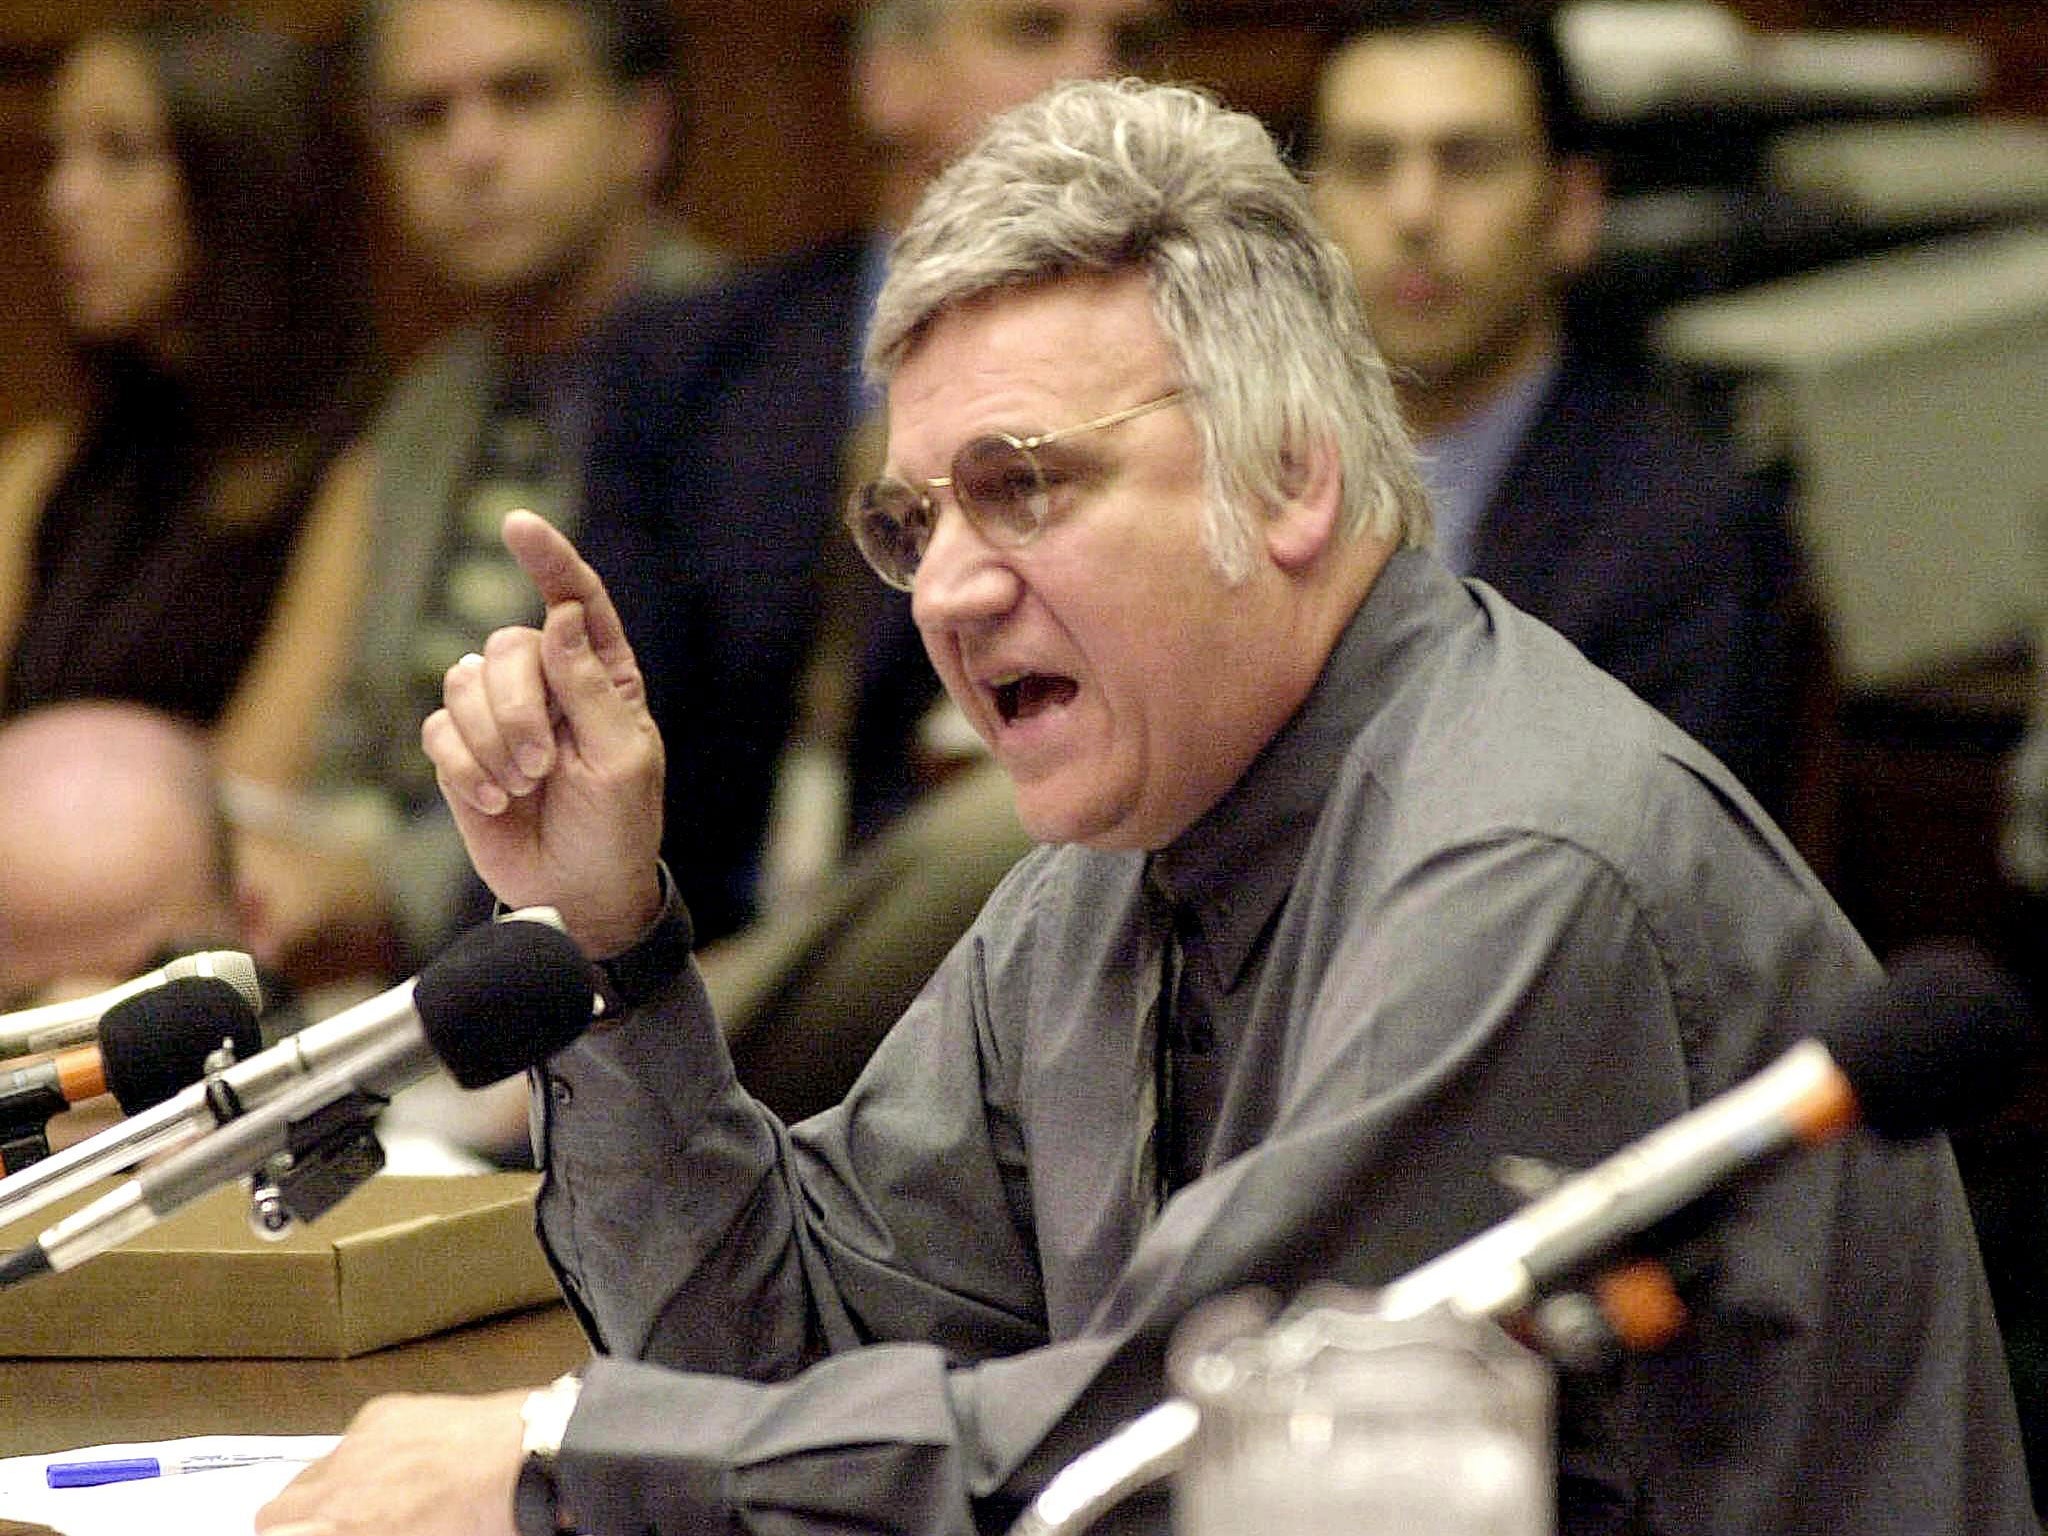 James Traficant testifying before the House Ethics Committee on Capitol Hill in Washington DC in 2002